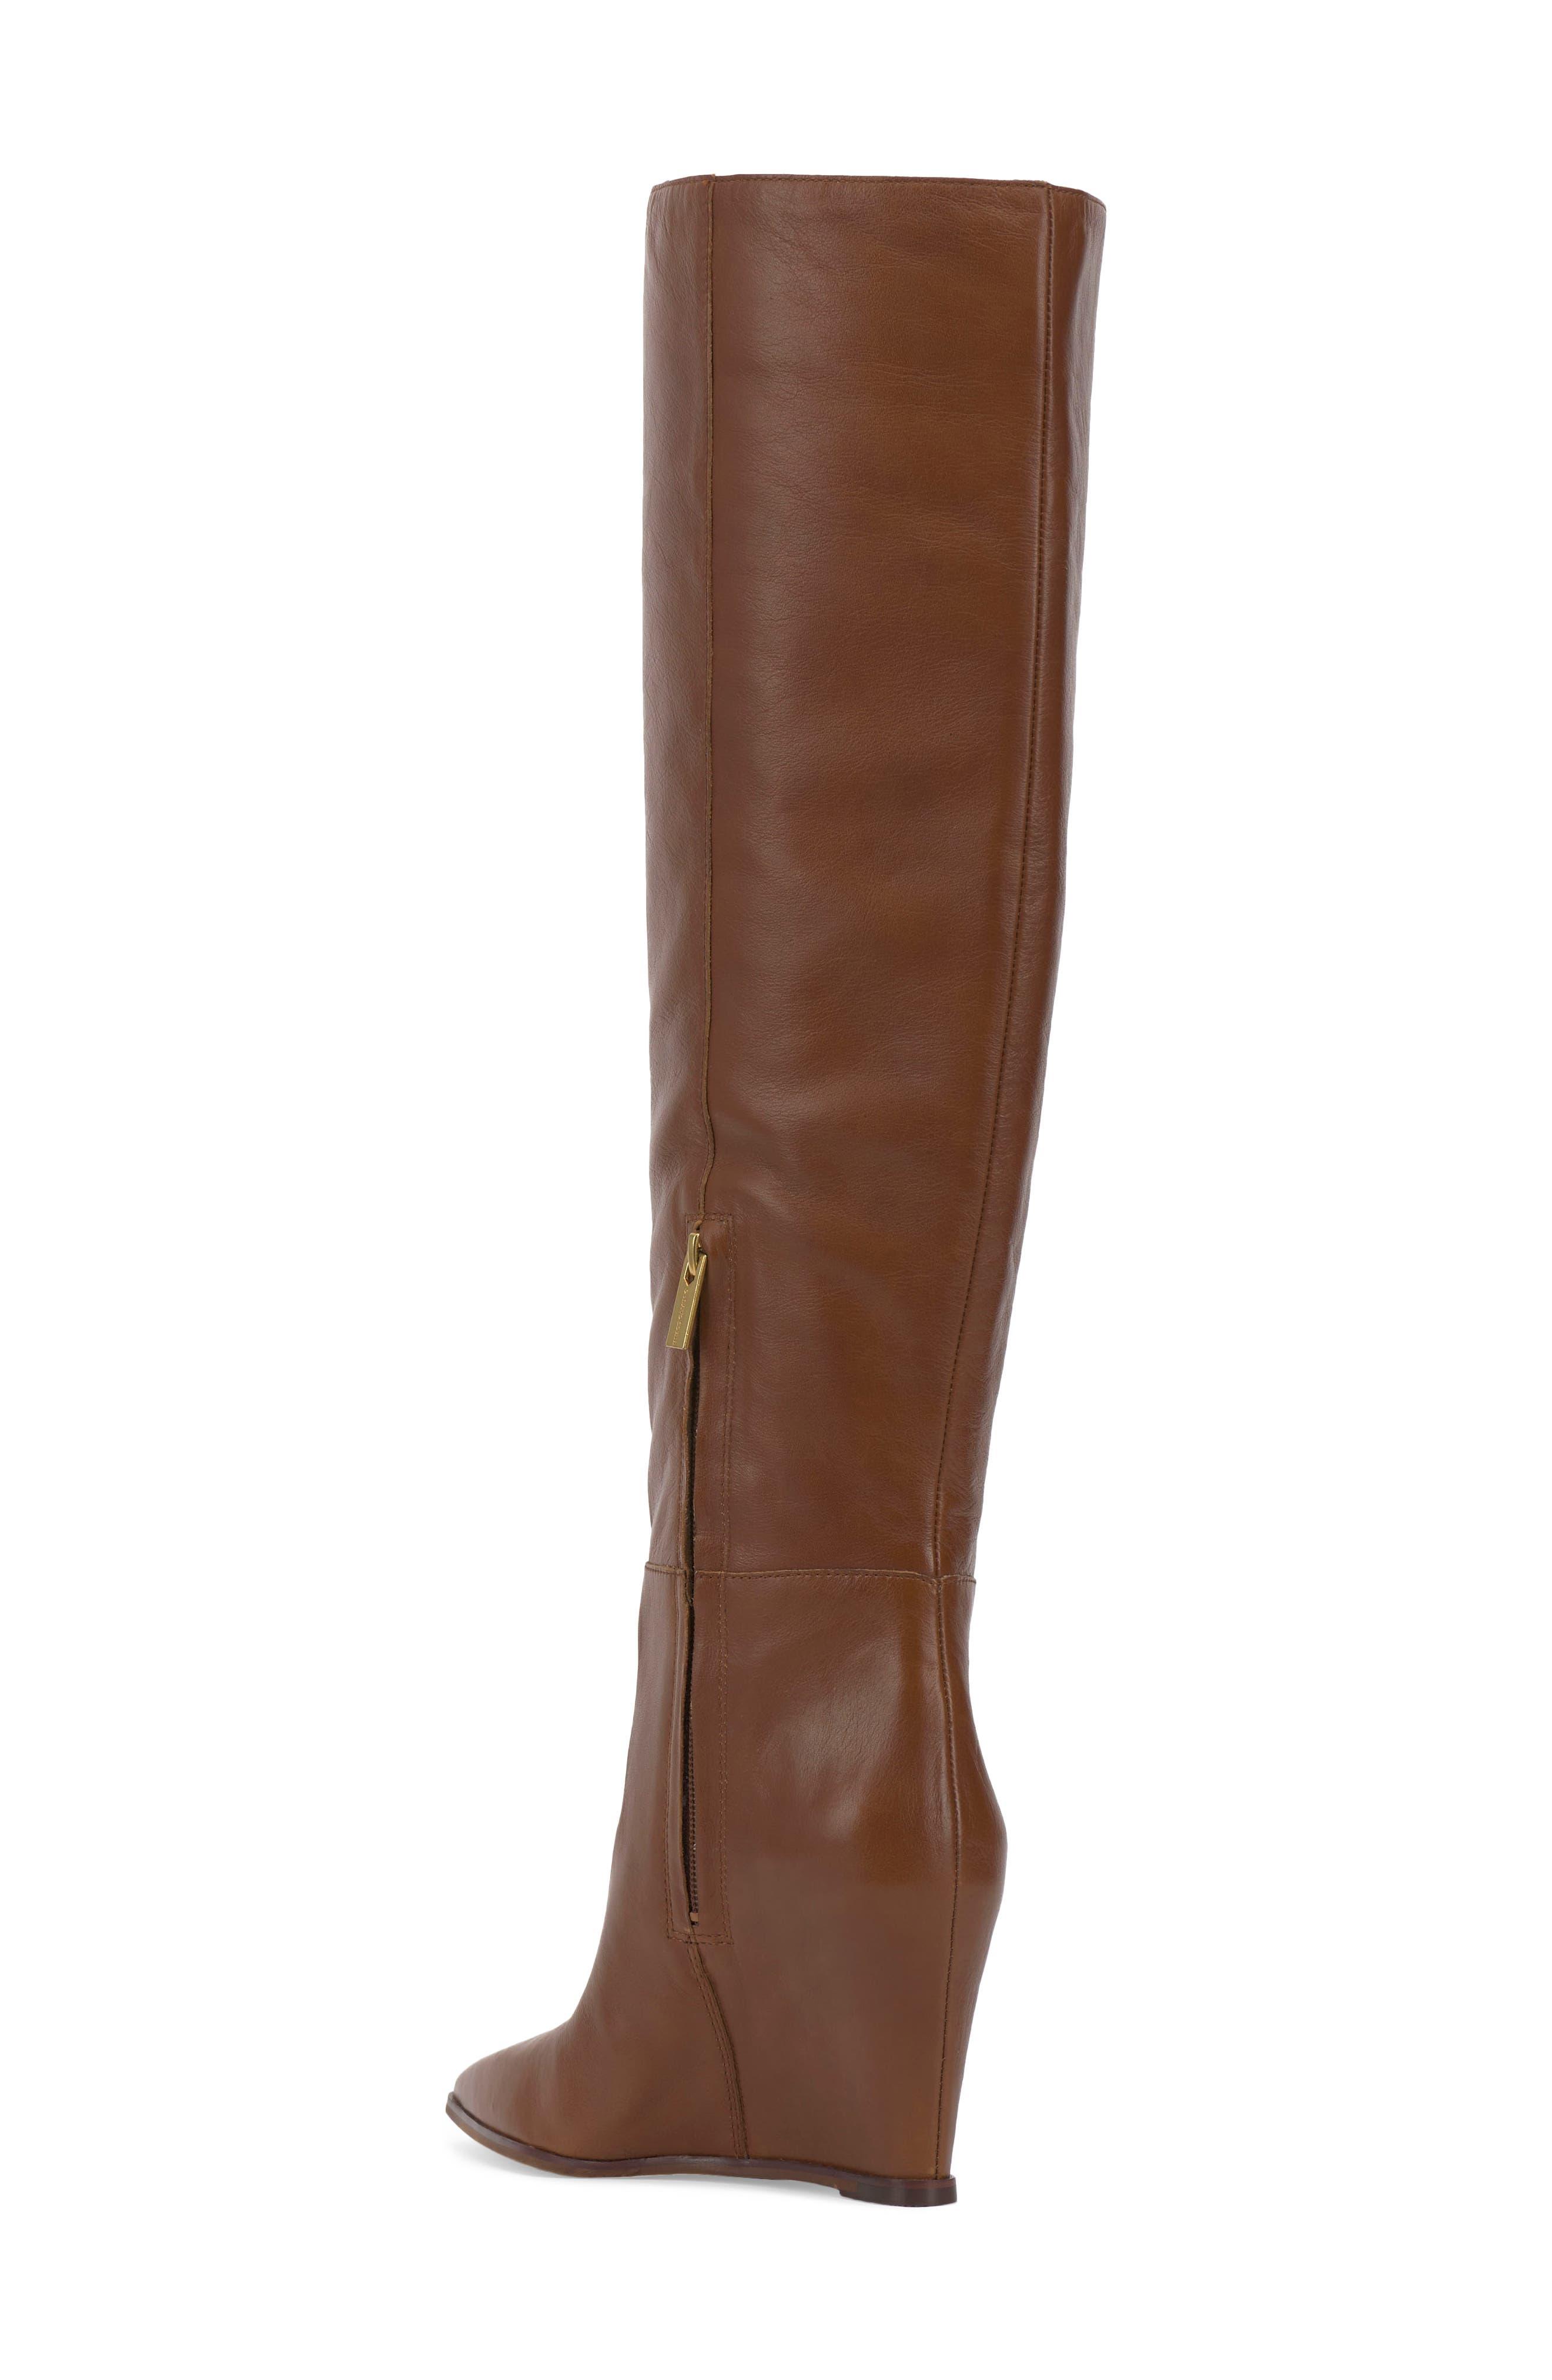 Vince Camuto Tiasie Over The Knee Wedge Boot in Brown